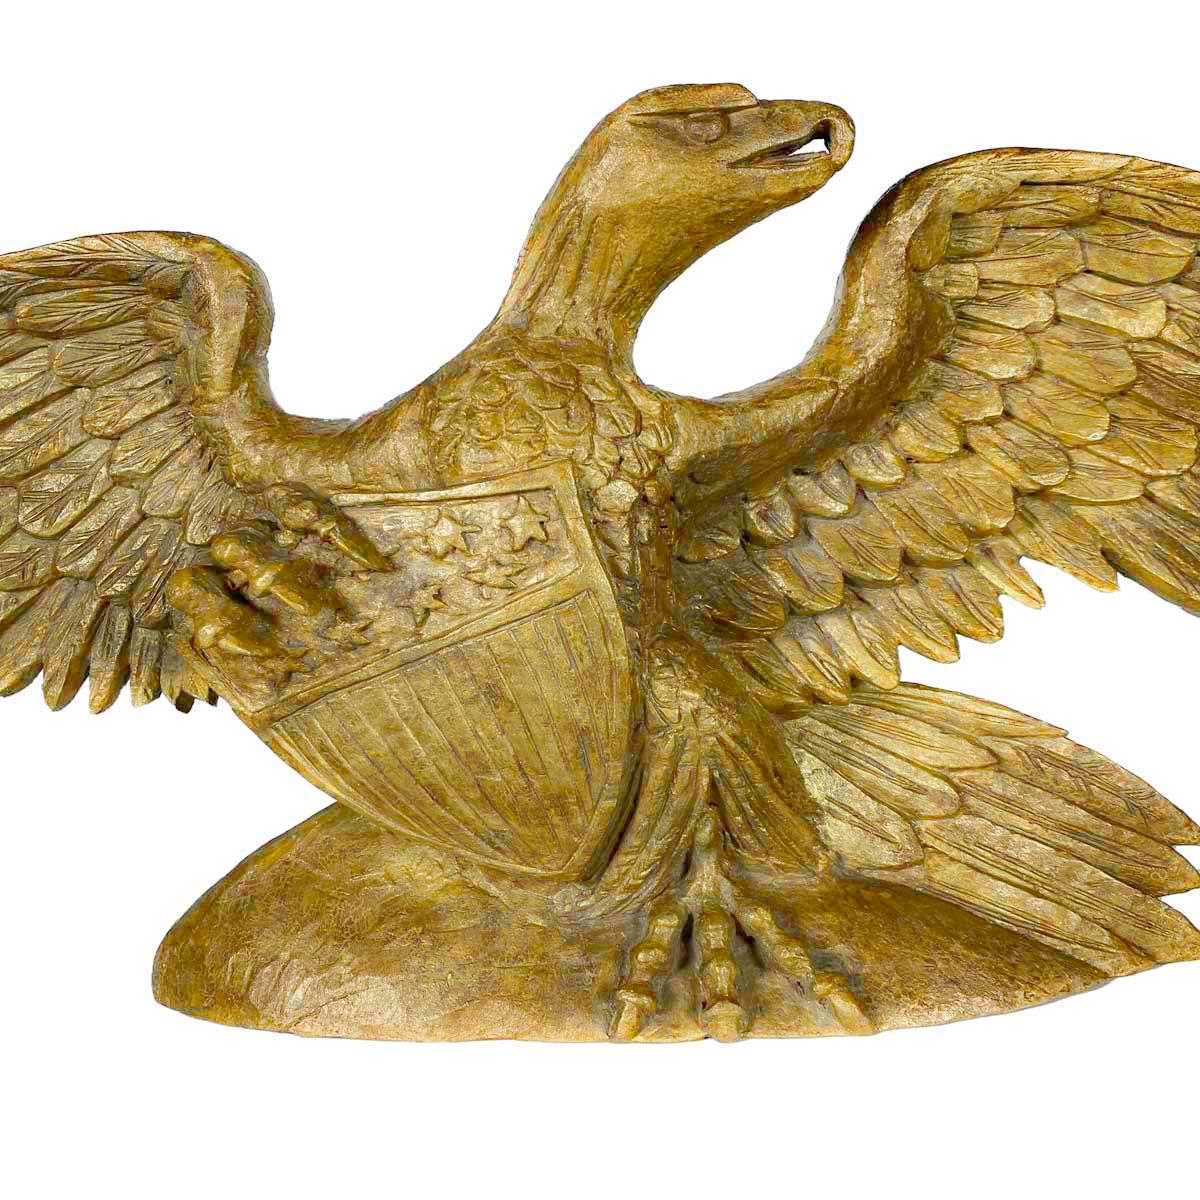 Early 20th century gold painted, carved wood figure of a spread-winged eagle clutching a shield with stars above vertical stripes. The eagle is perched on a rounded base with its head turned and looking fierce.